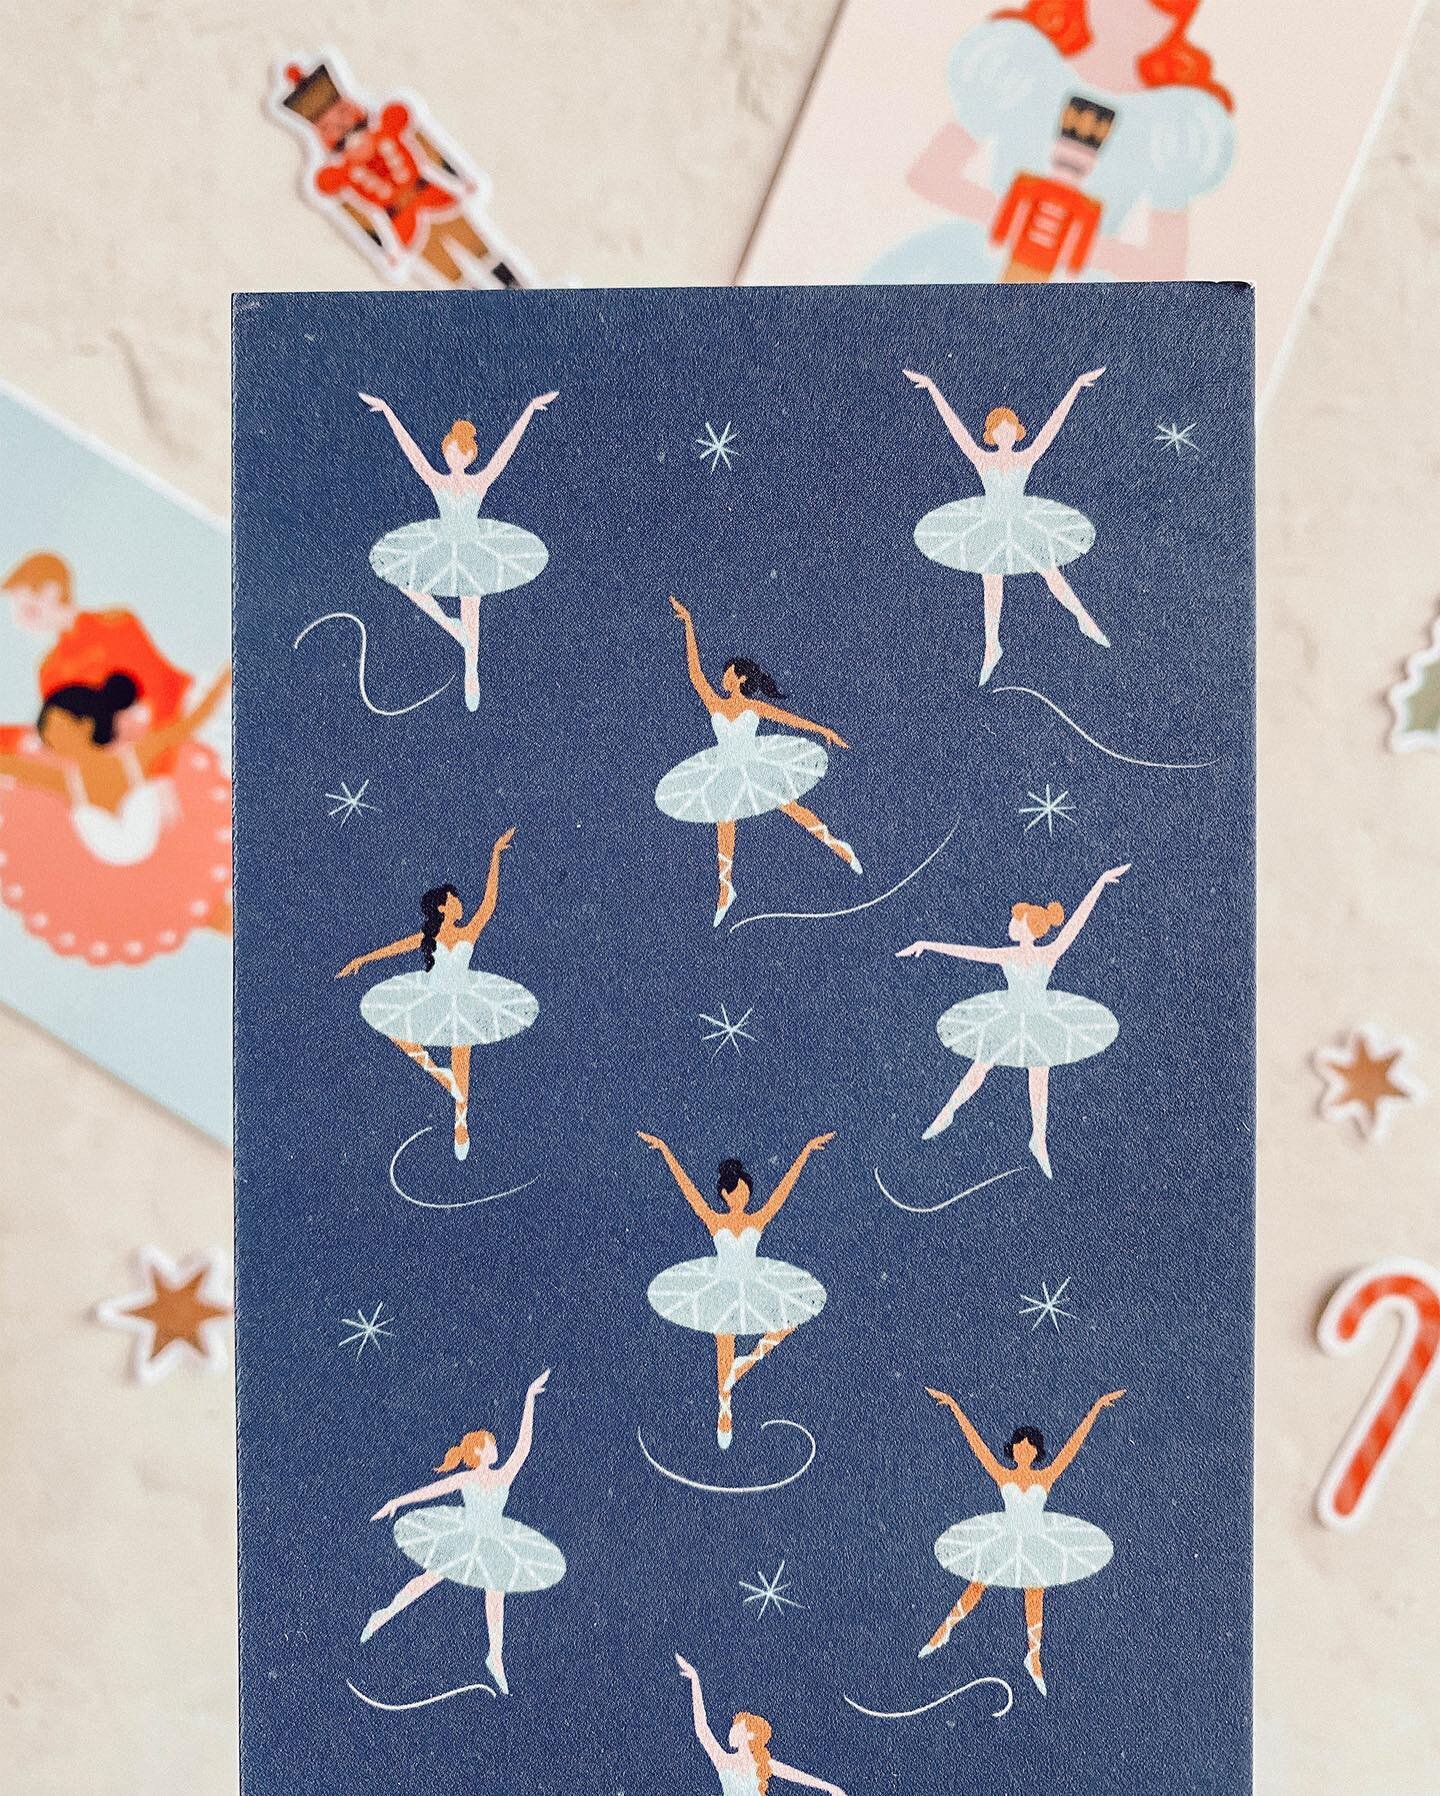 A flurry of snowflake tutus is the fourth installment of the #nutcracker series &mdash; The Waltz of the Snowflakes! Swipe for a close crop of their lil' tutus. Definitely going to envision these ladies dancing about the next time it snows.